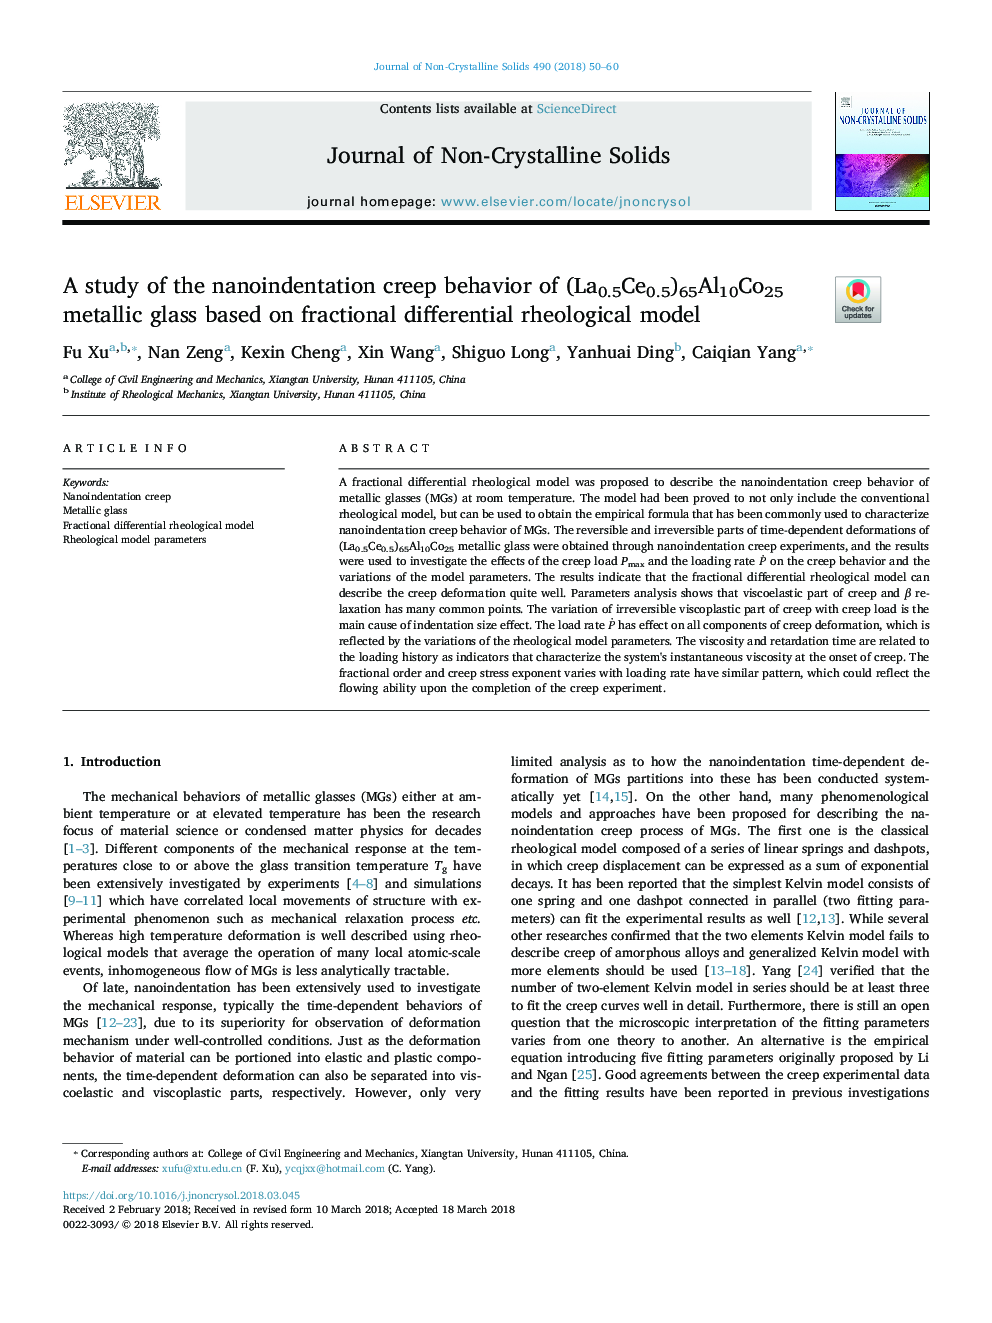 A study of the nanoindentation creep behavior of (La0.5Ce0.5)65Al10Co25 metallic glass based on fractional differential rheological model